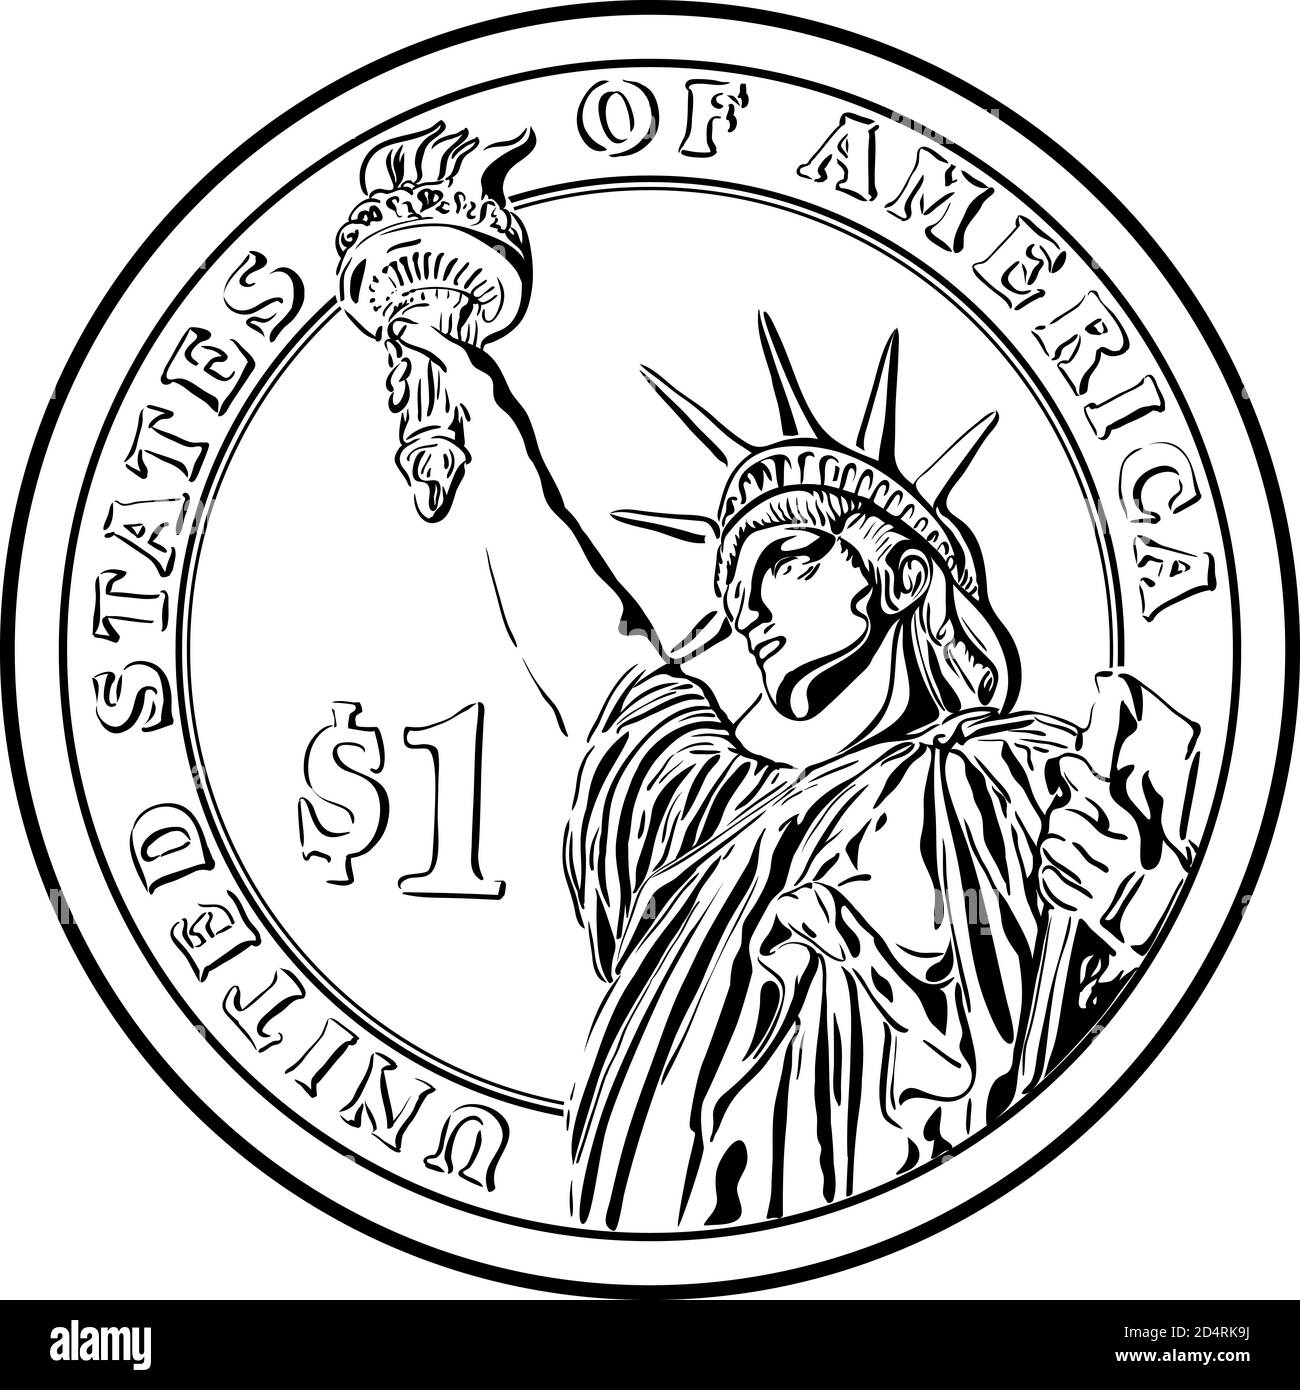 American money Presidential one dollar gold coin with Statue of Liberty on reverse.Black and white image Stock Vector